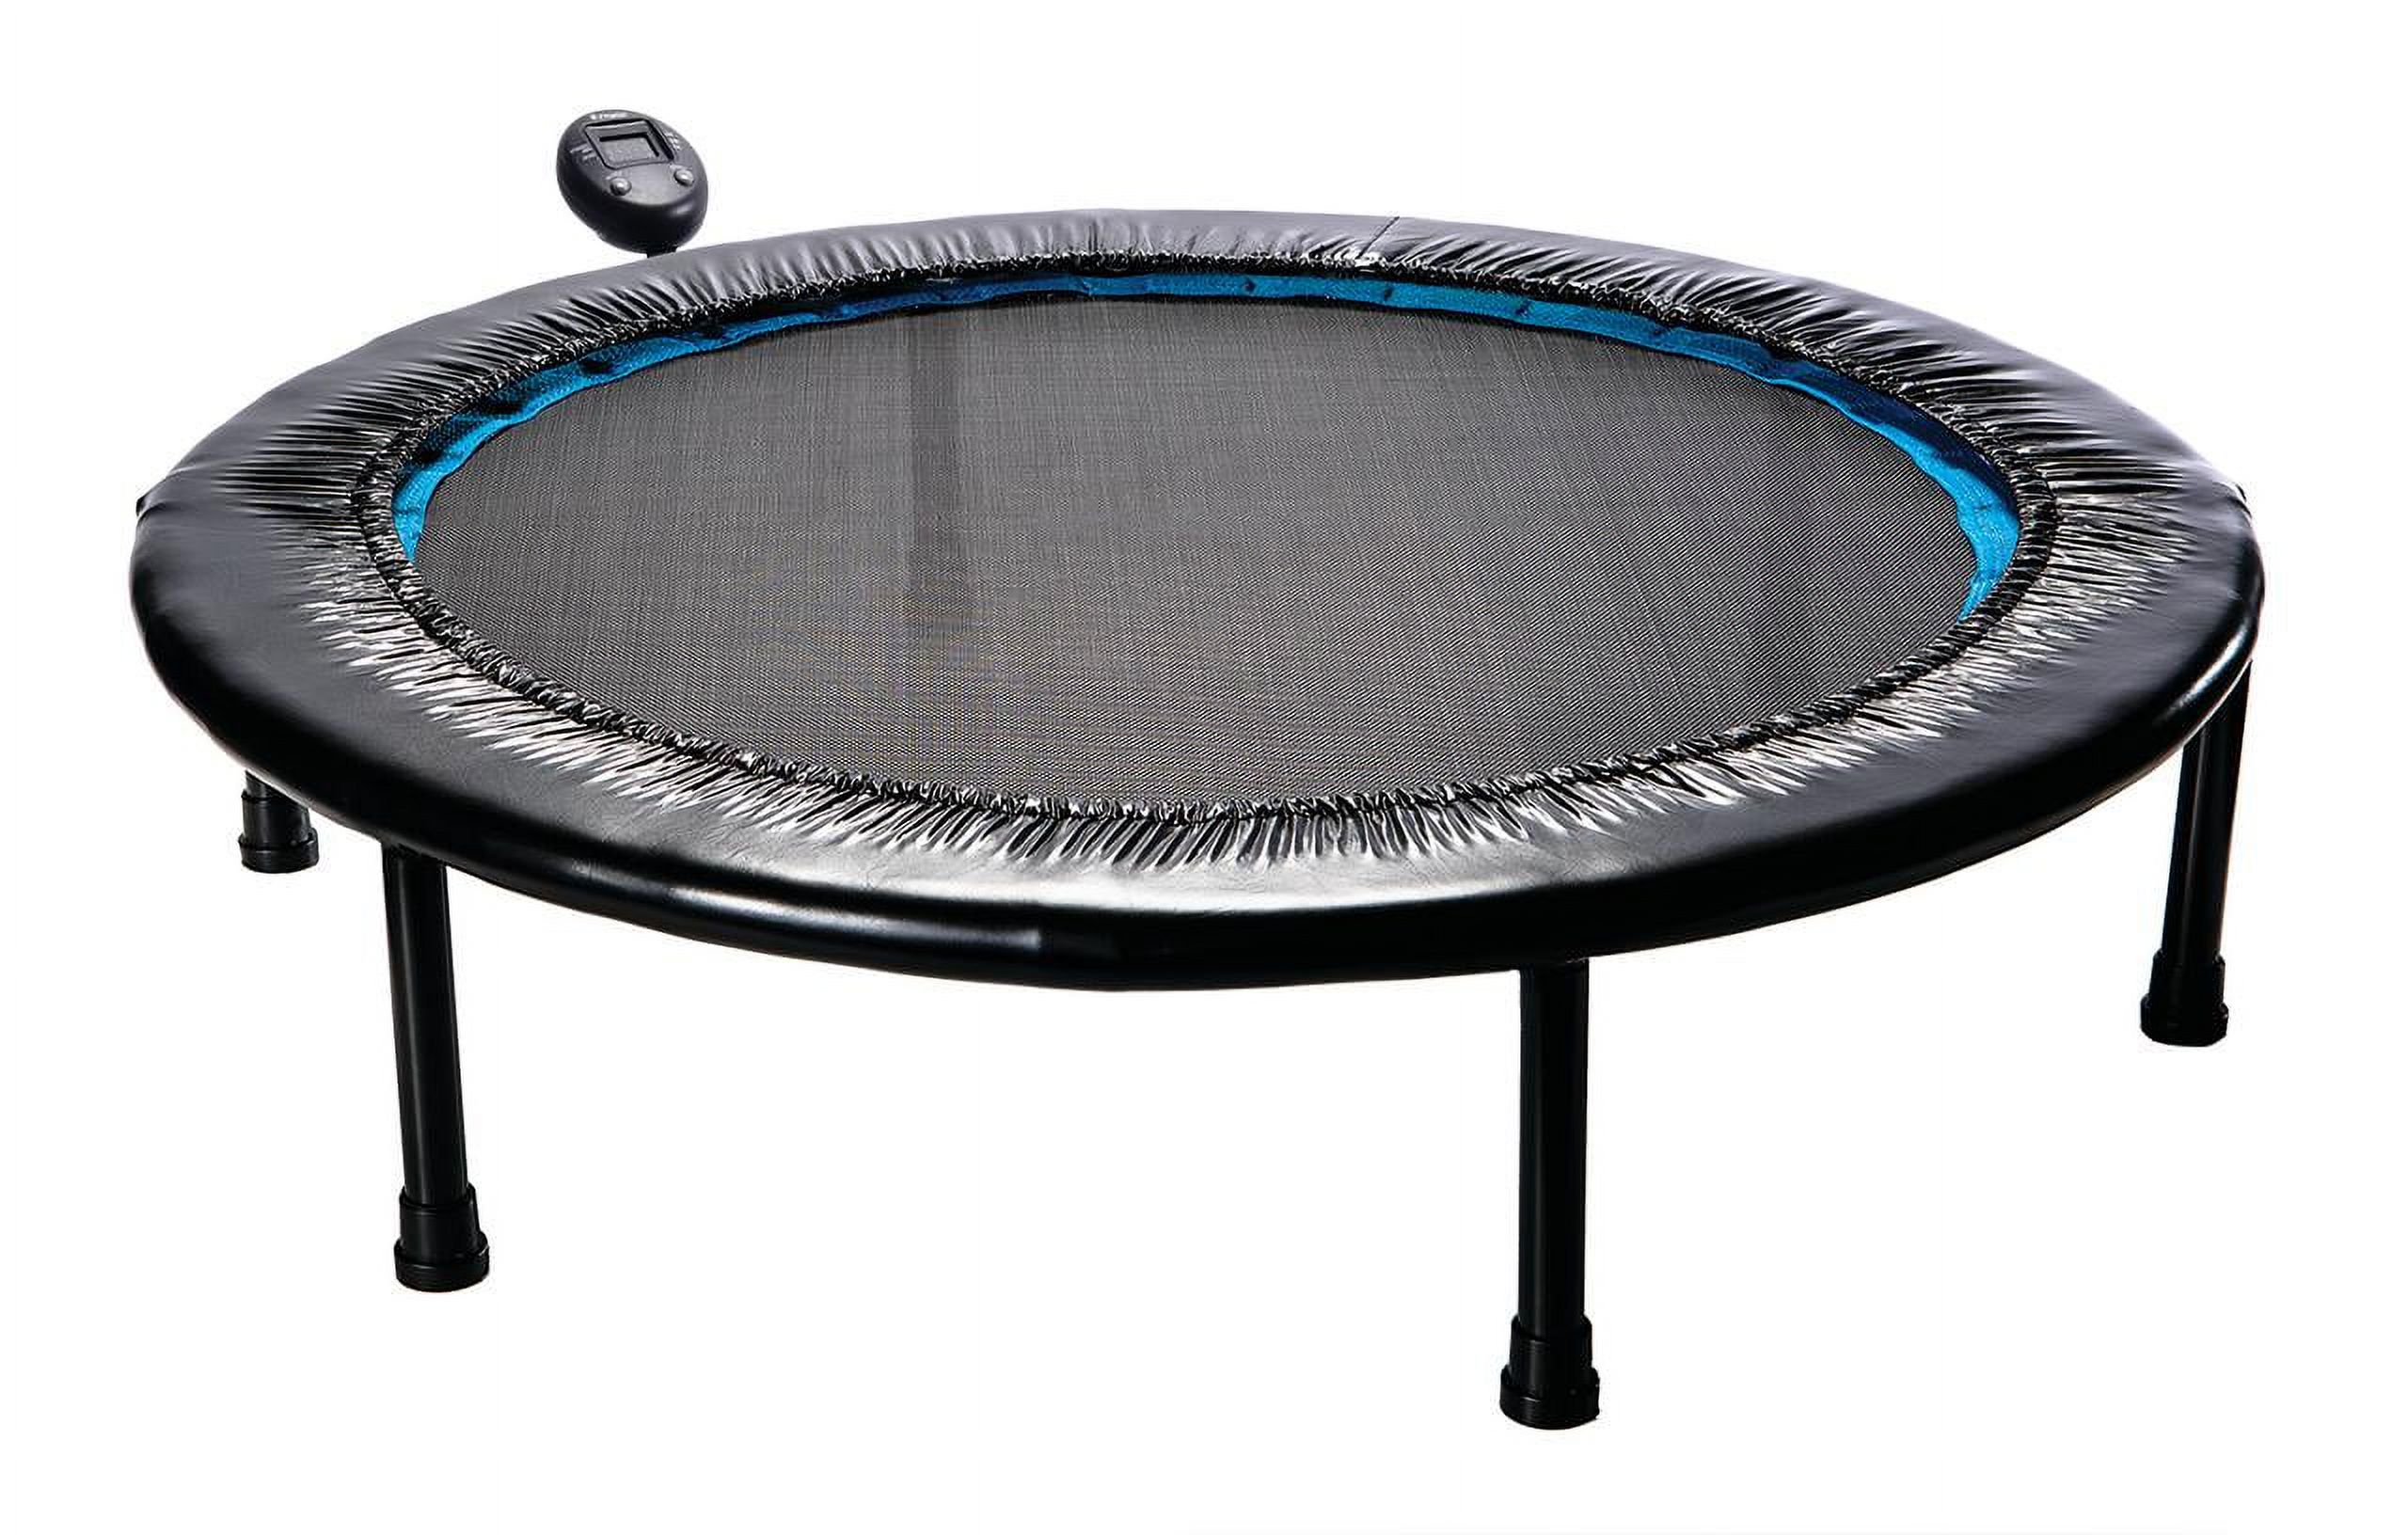 Stamina Circuit Trainer Trampoline with Monitor and Adjustable Incline, 36" W x 36" D x 12" H, Black - image 1 of 9